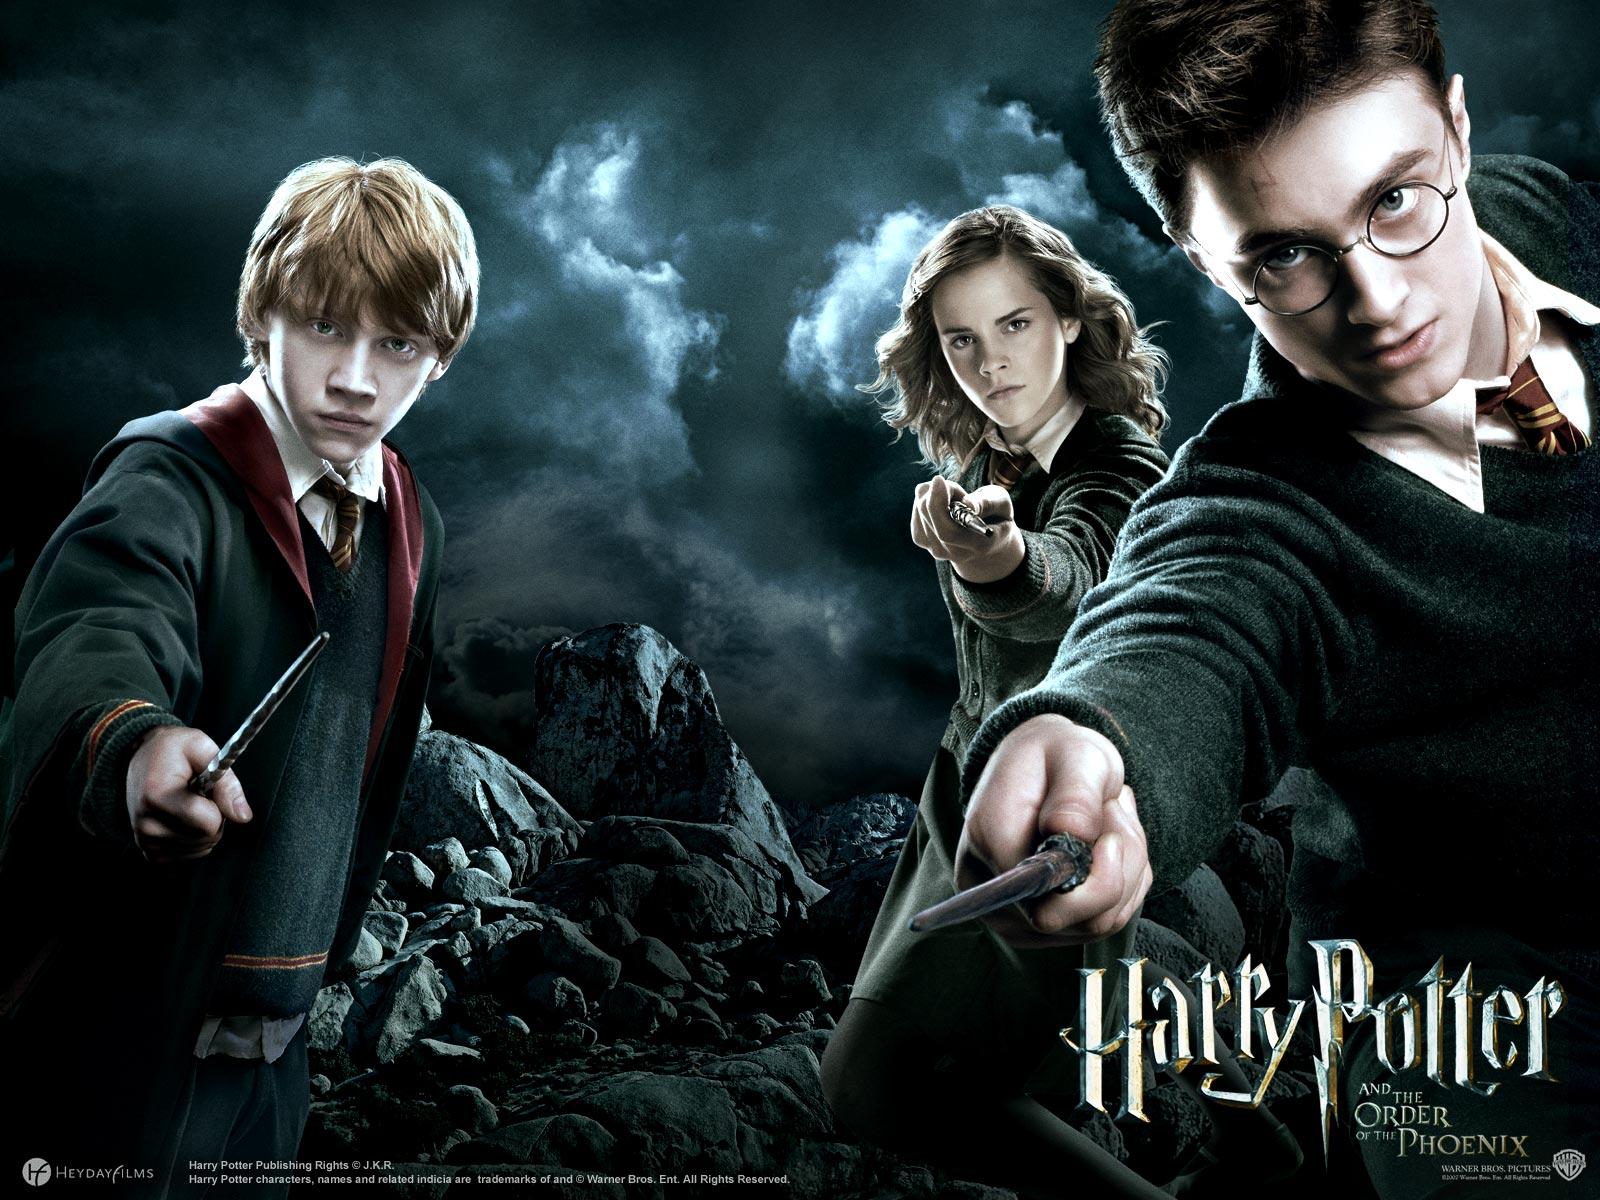 Previous, Movies - Movies H - Harry Potter and Order of Phoenix wallpaper